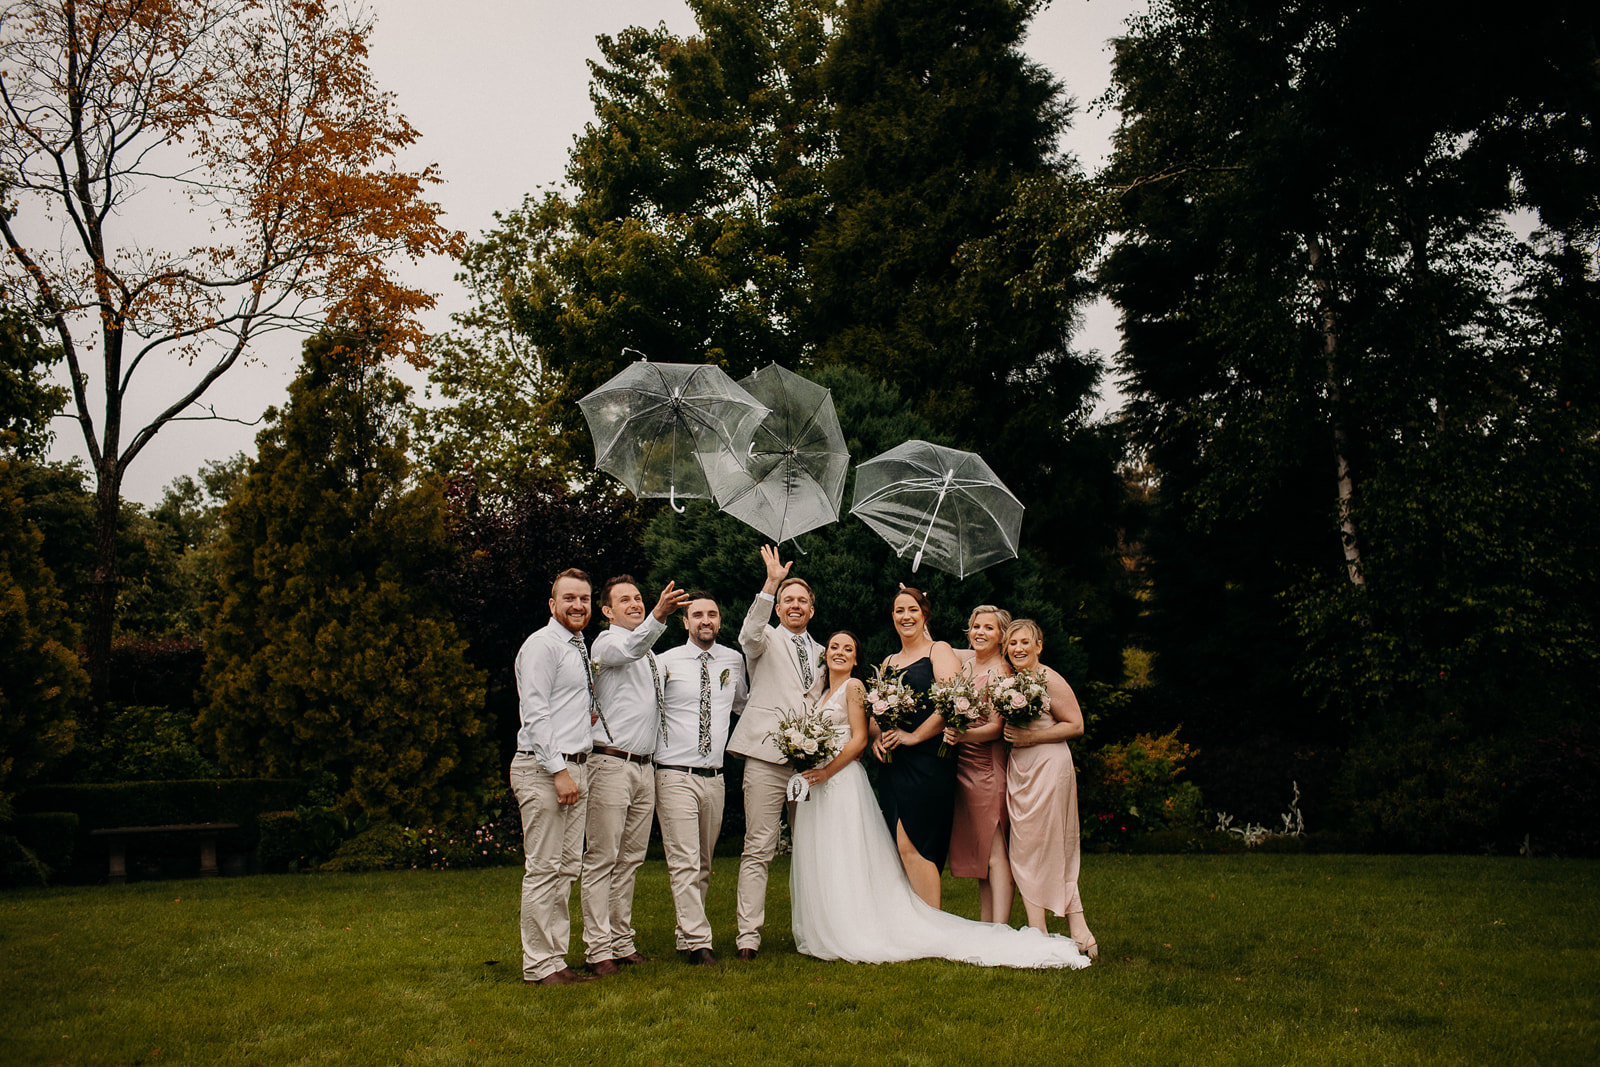 A wet December Southern Highlands wedding for Kelly and Scott.